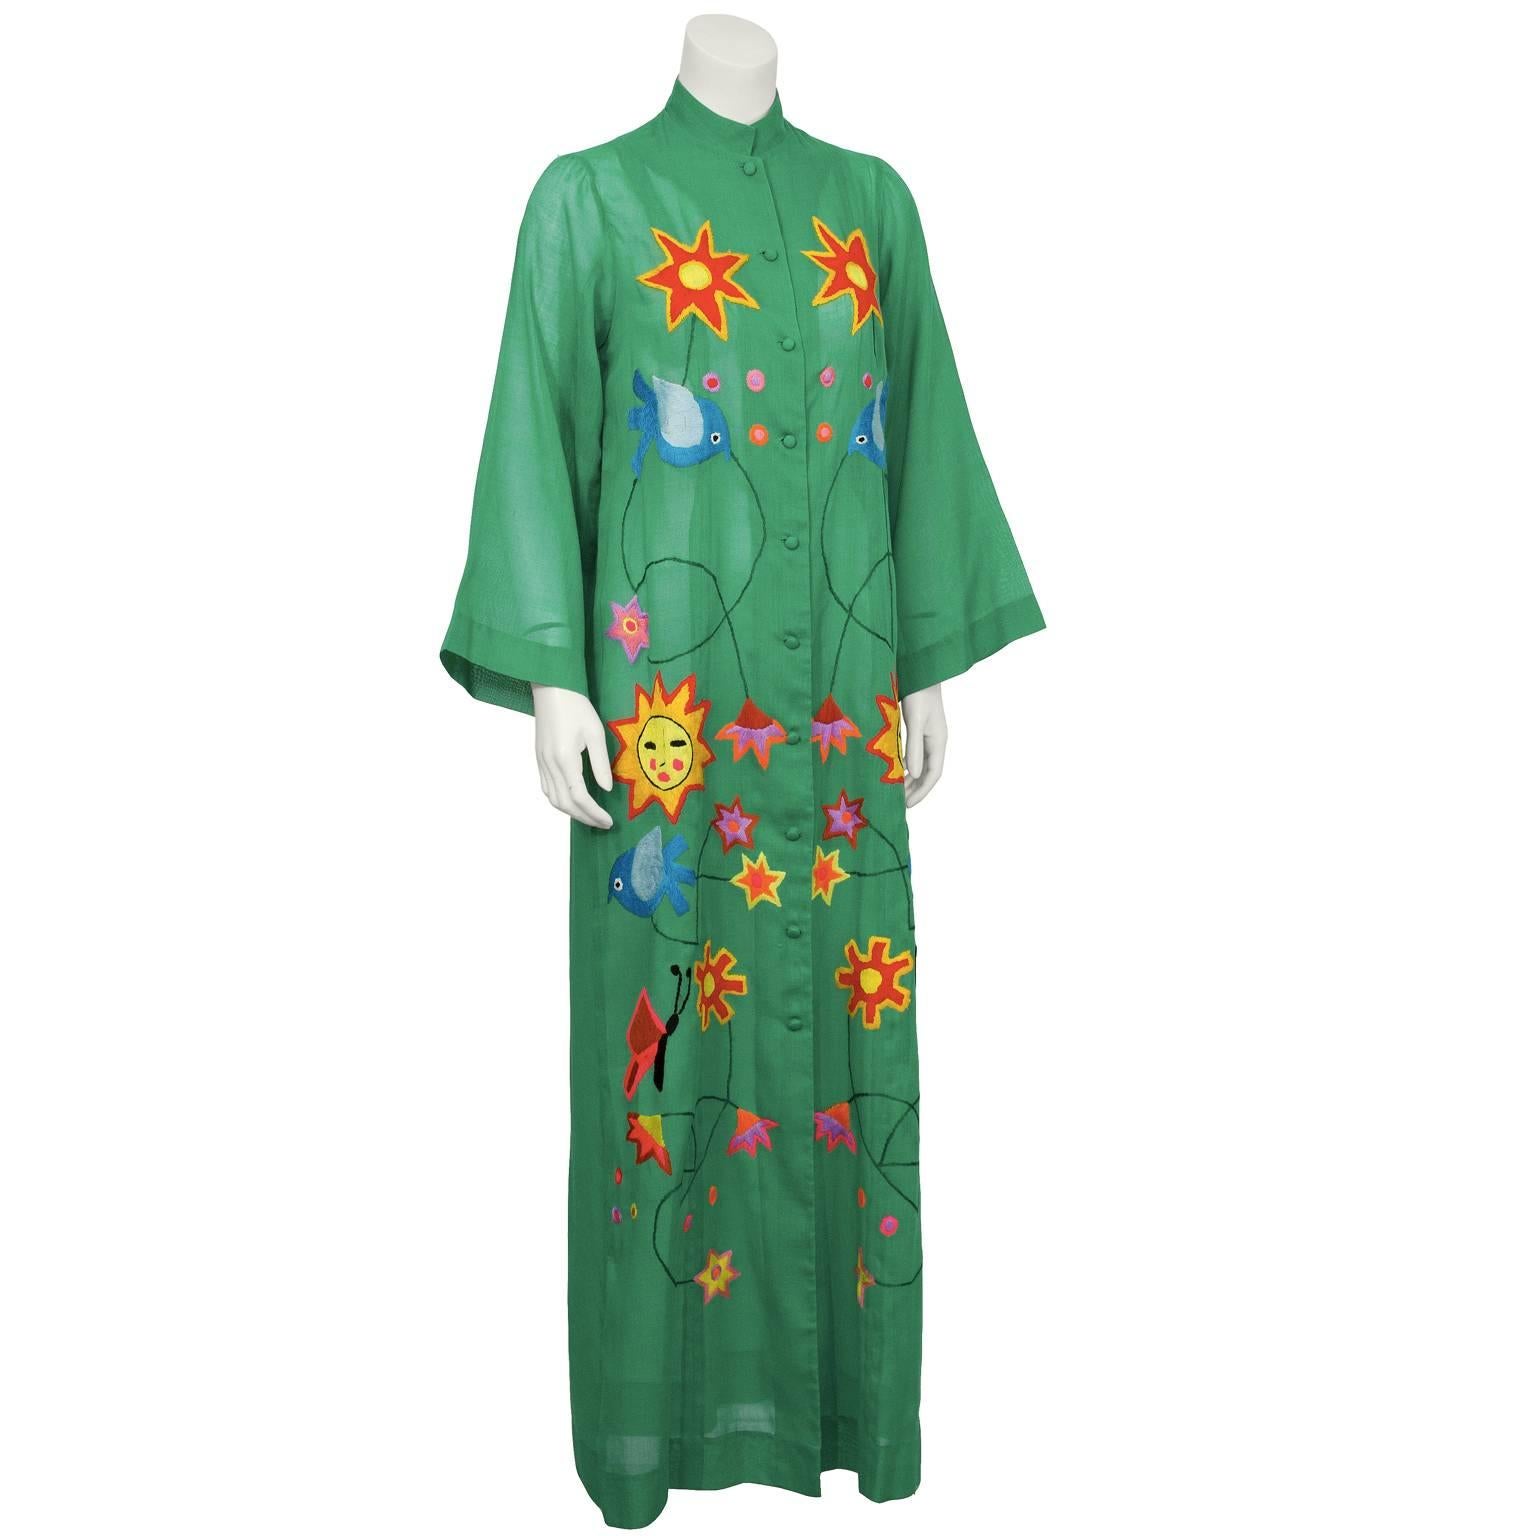 Anonymous green maxi dress with embroidery from the 1960’s. This dress is the perfect mix of boho with a Mexican vibe and the embroidery is in impeccable condition. Featuring stars, birds, suns, insects and flowers, the vibrant colors on the green